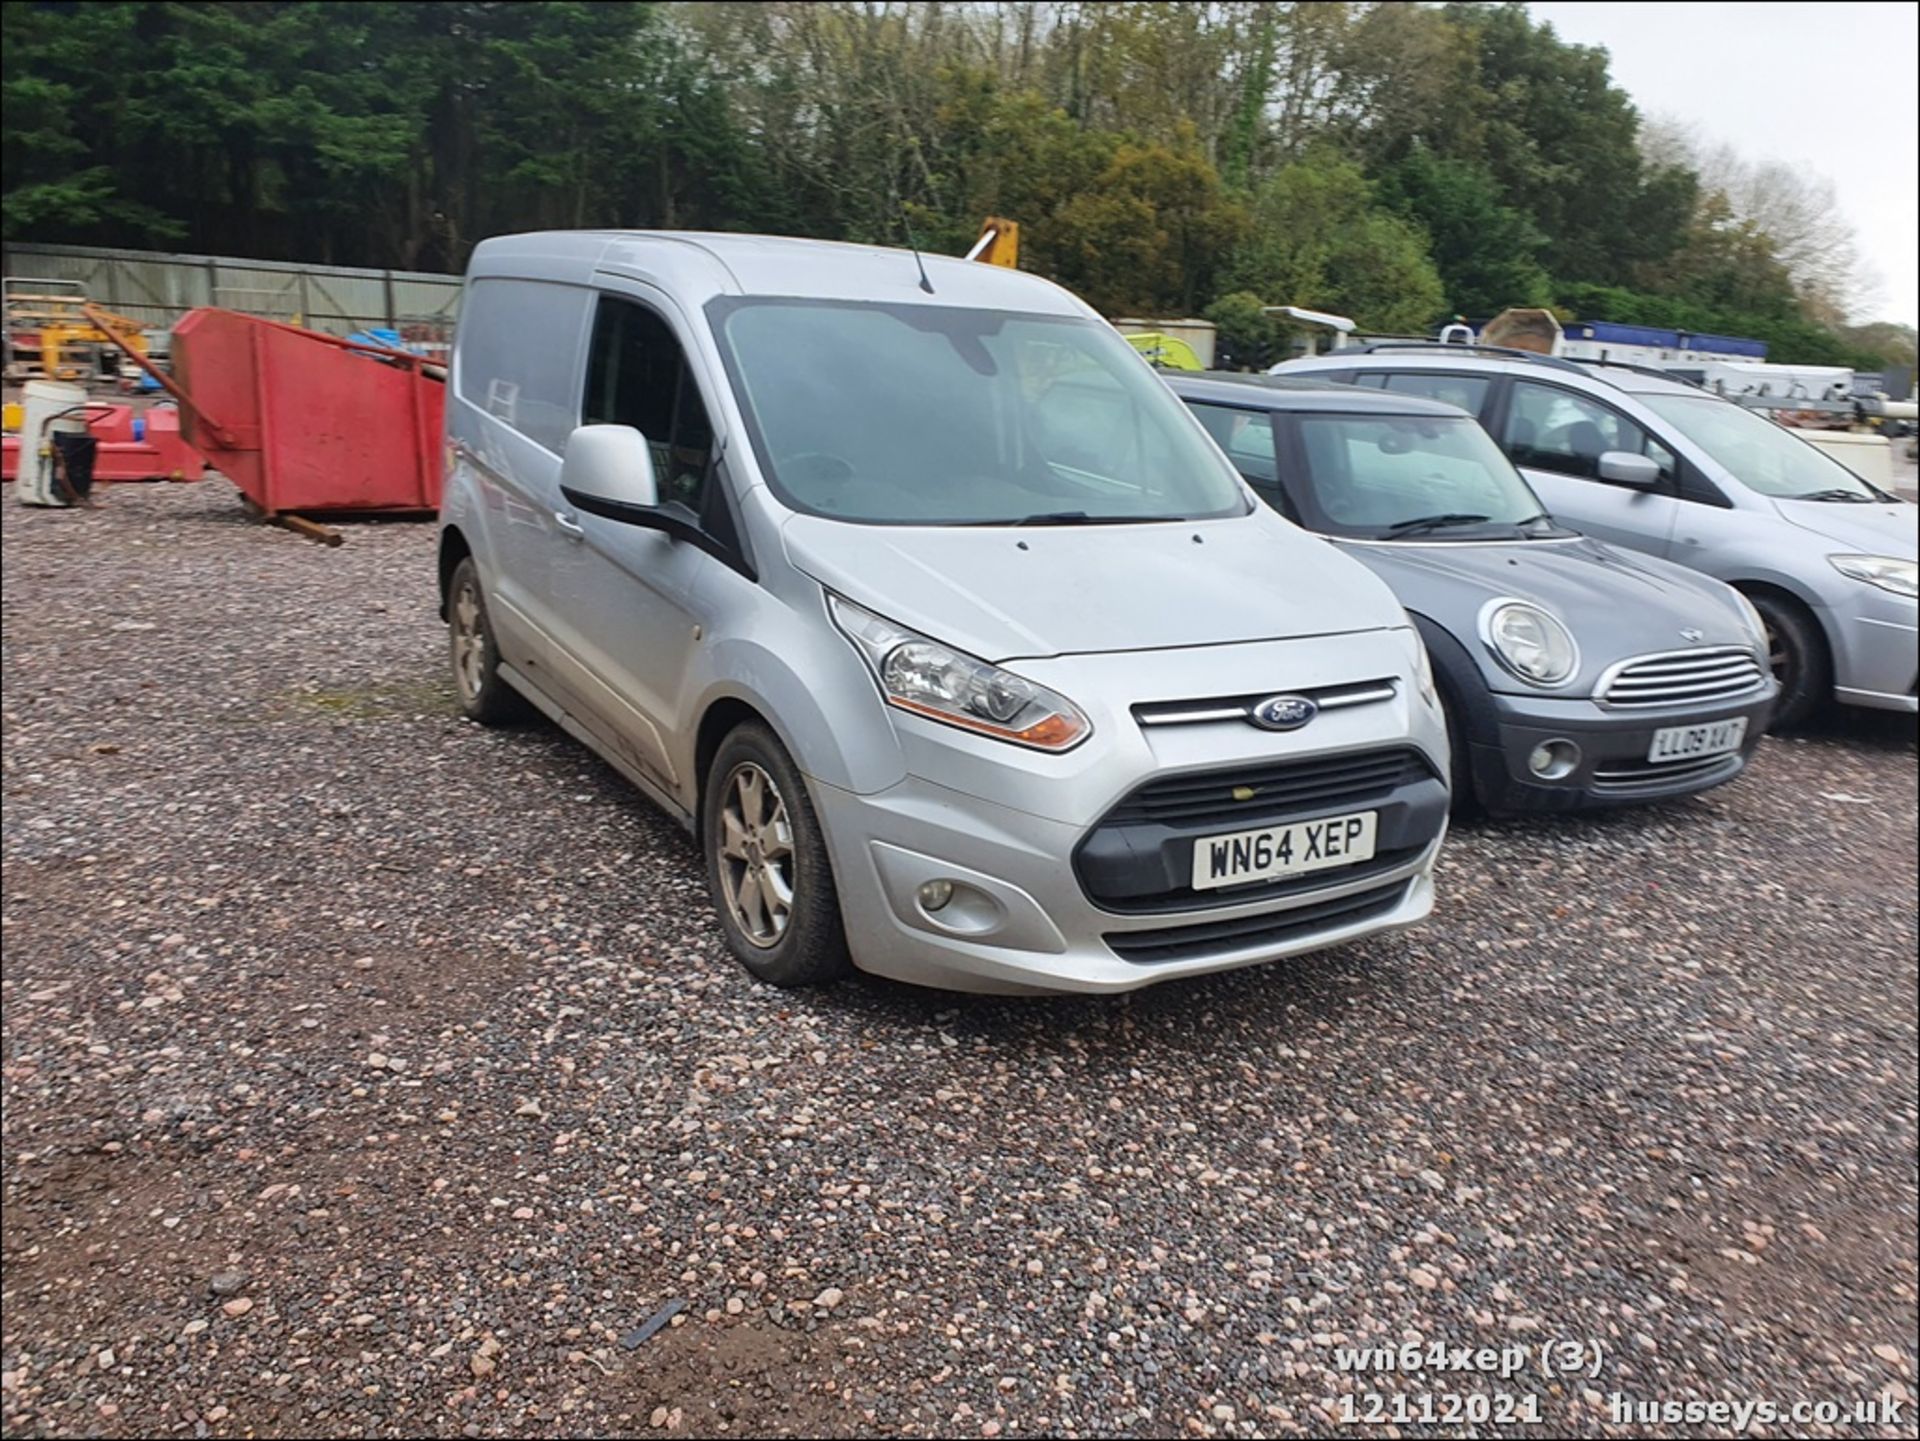 14/64 FORD TRANSIT CONNECT 200 LIMIT - 1560cc 5dr Van (Silver, 82k) - Image 4 of 27